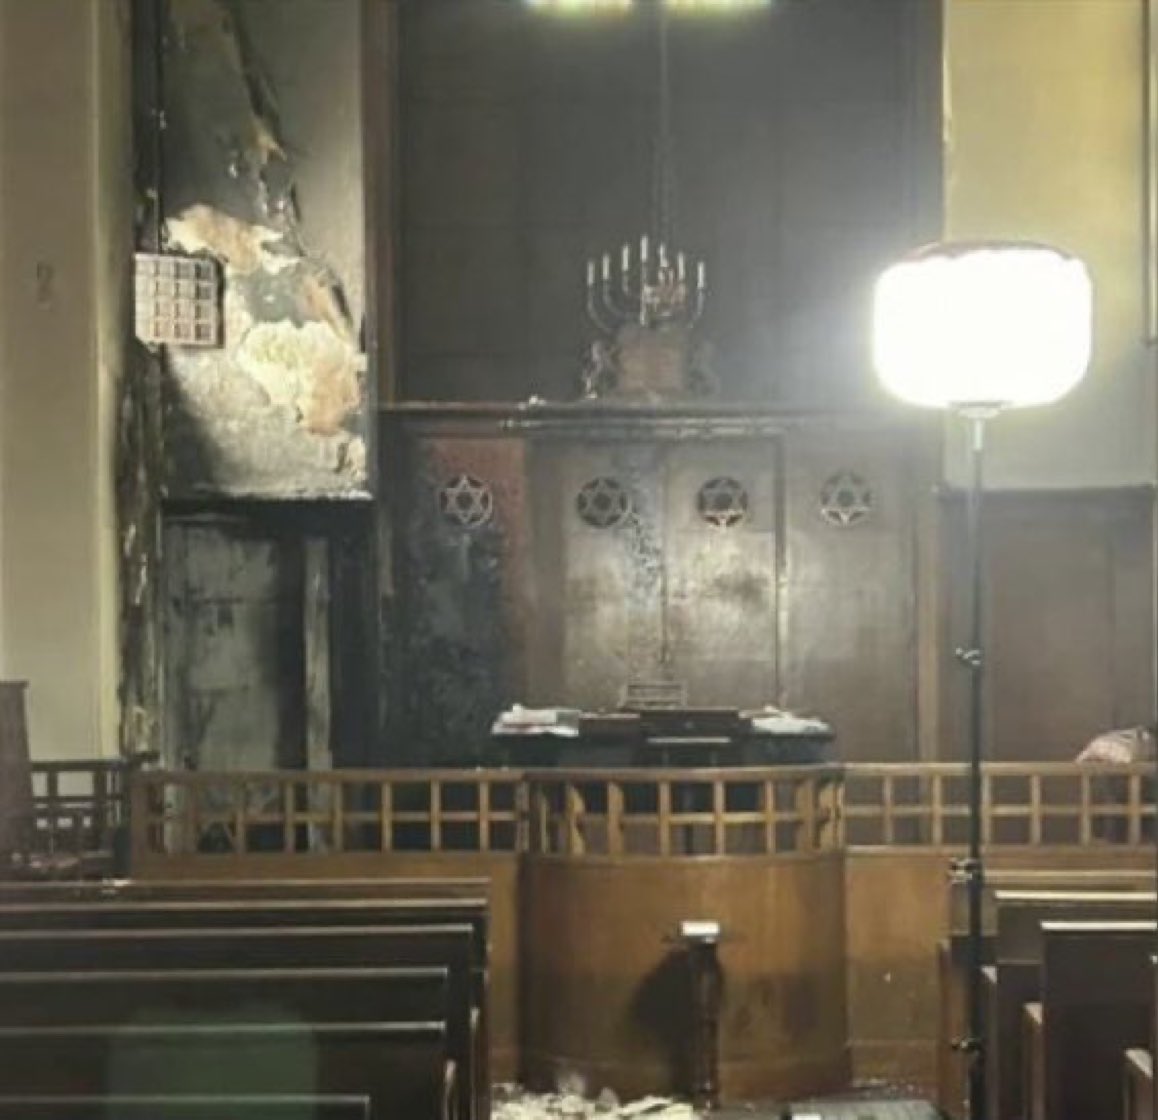 They say 'Go back to Europe' and then burn synagogues in Europe. Here in France: